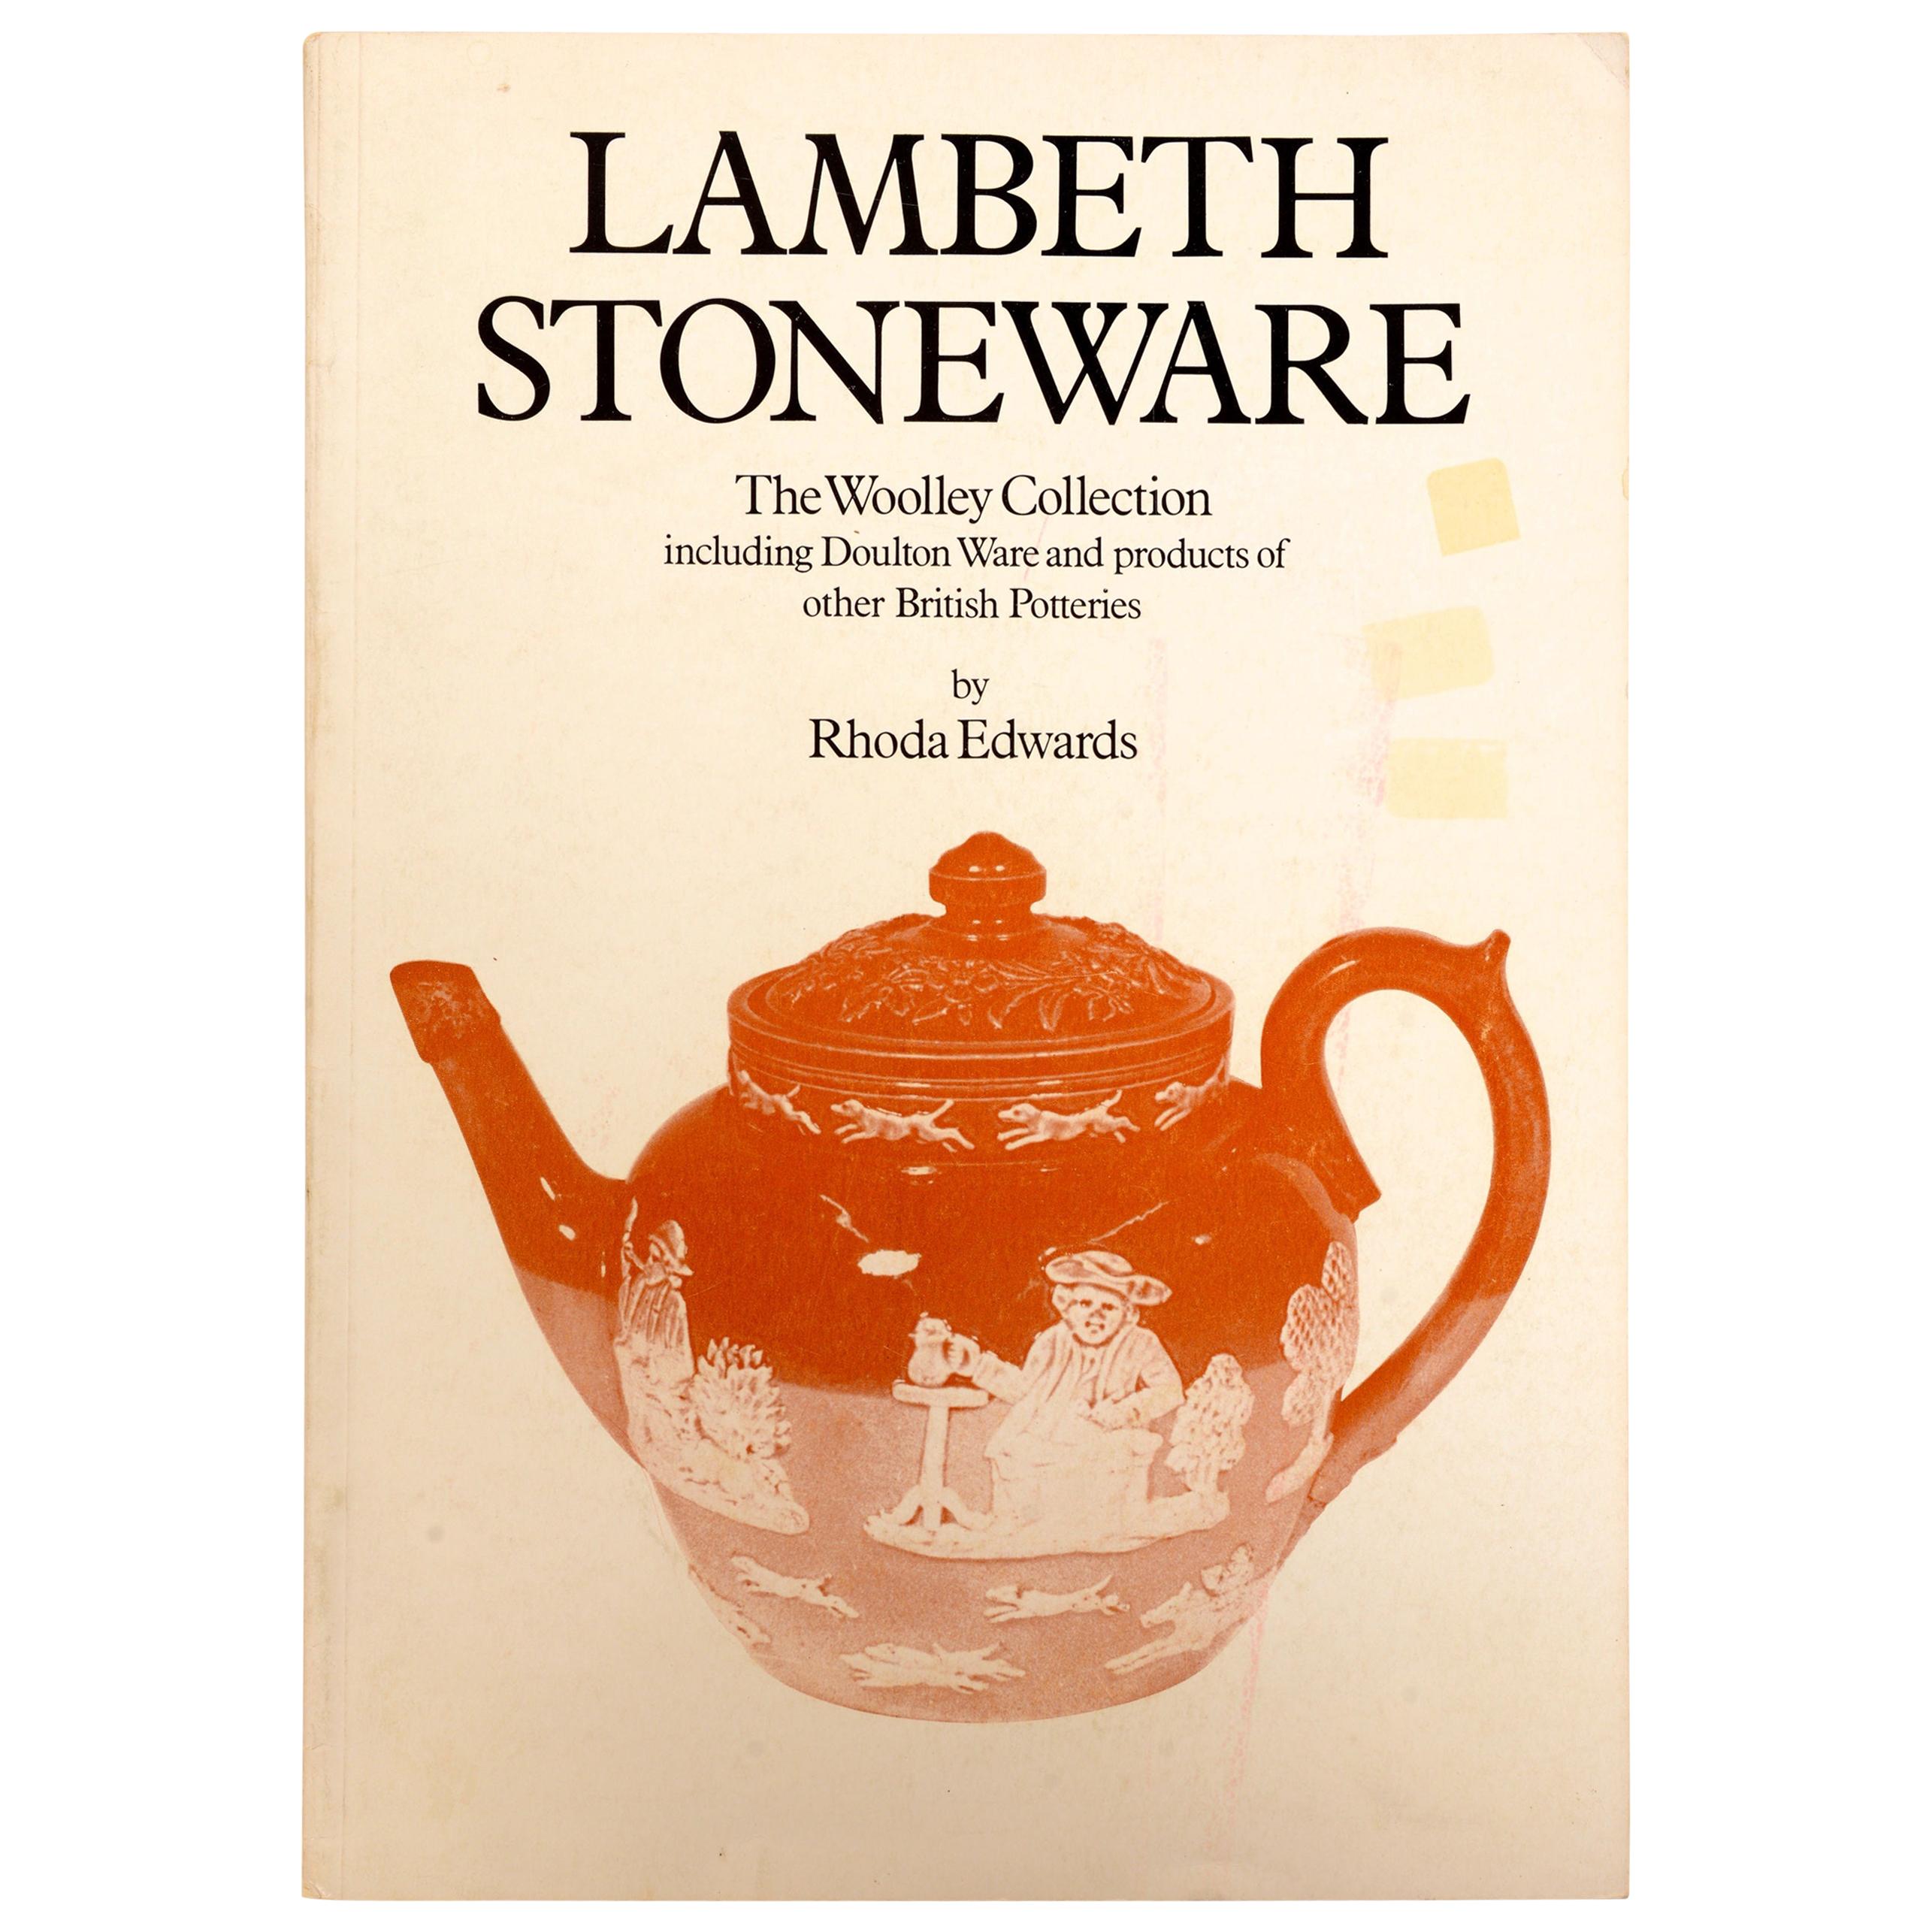 Lambeth Stoneware; The Woolley Collection, products of British Potteries